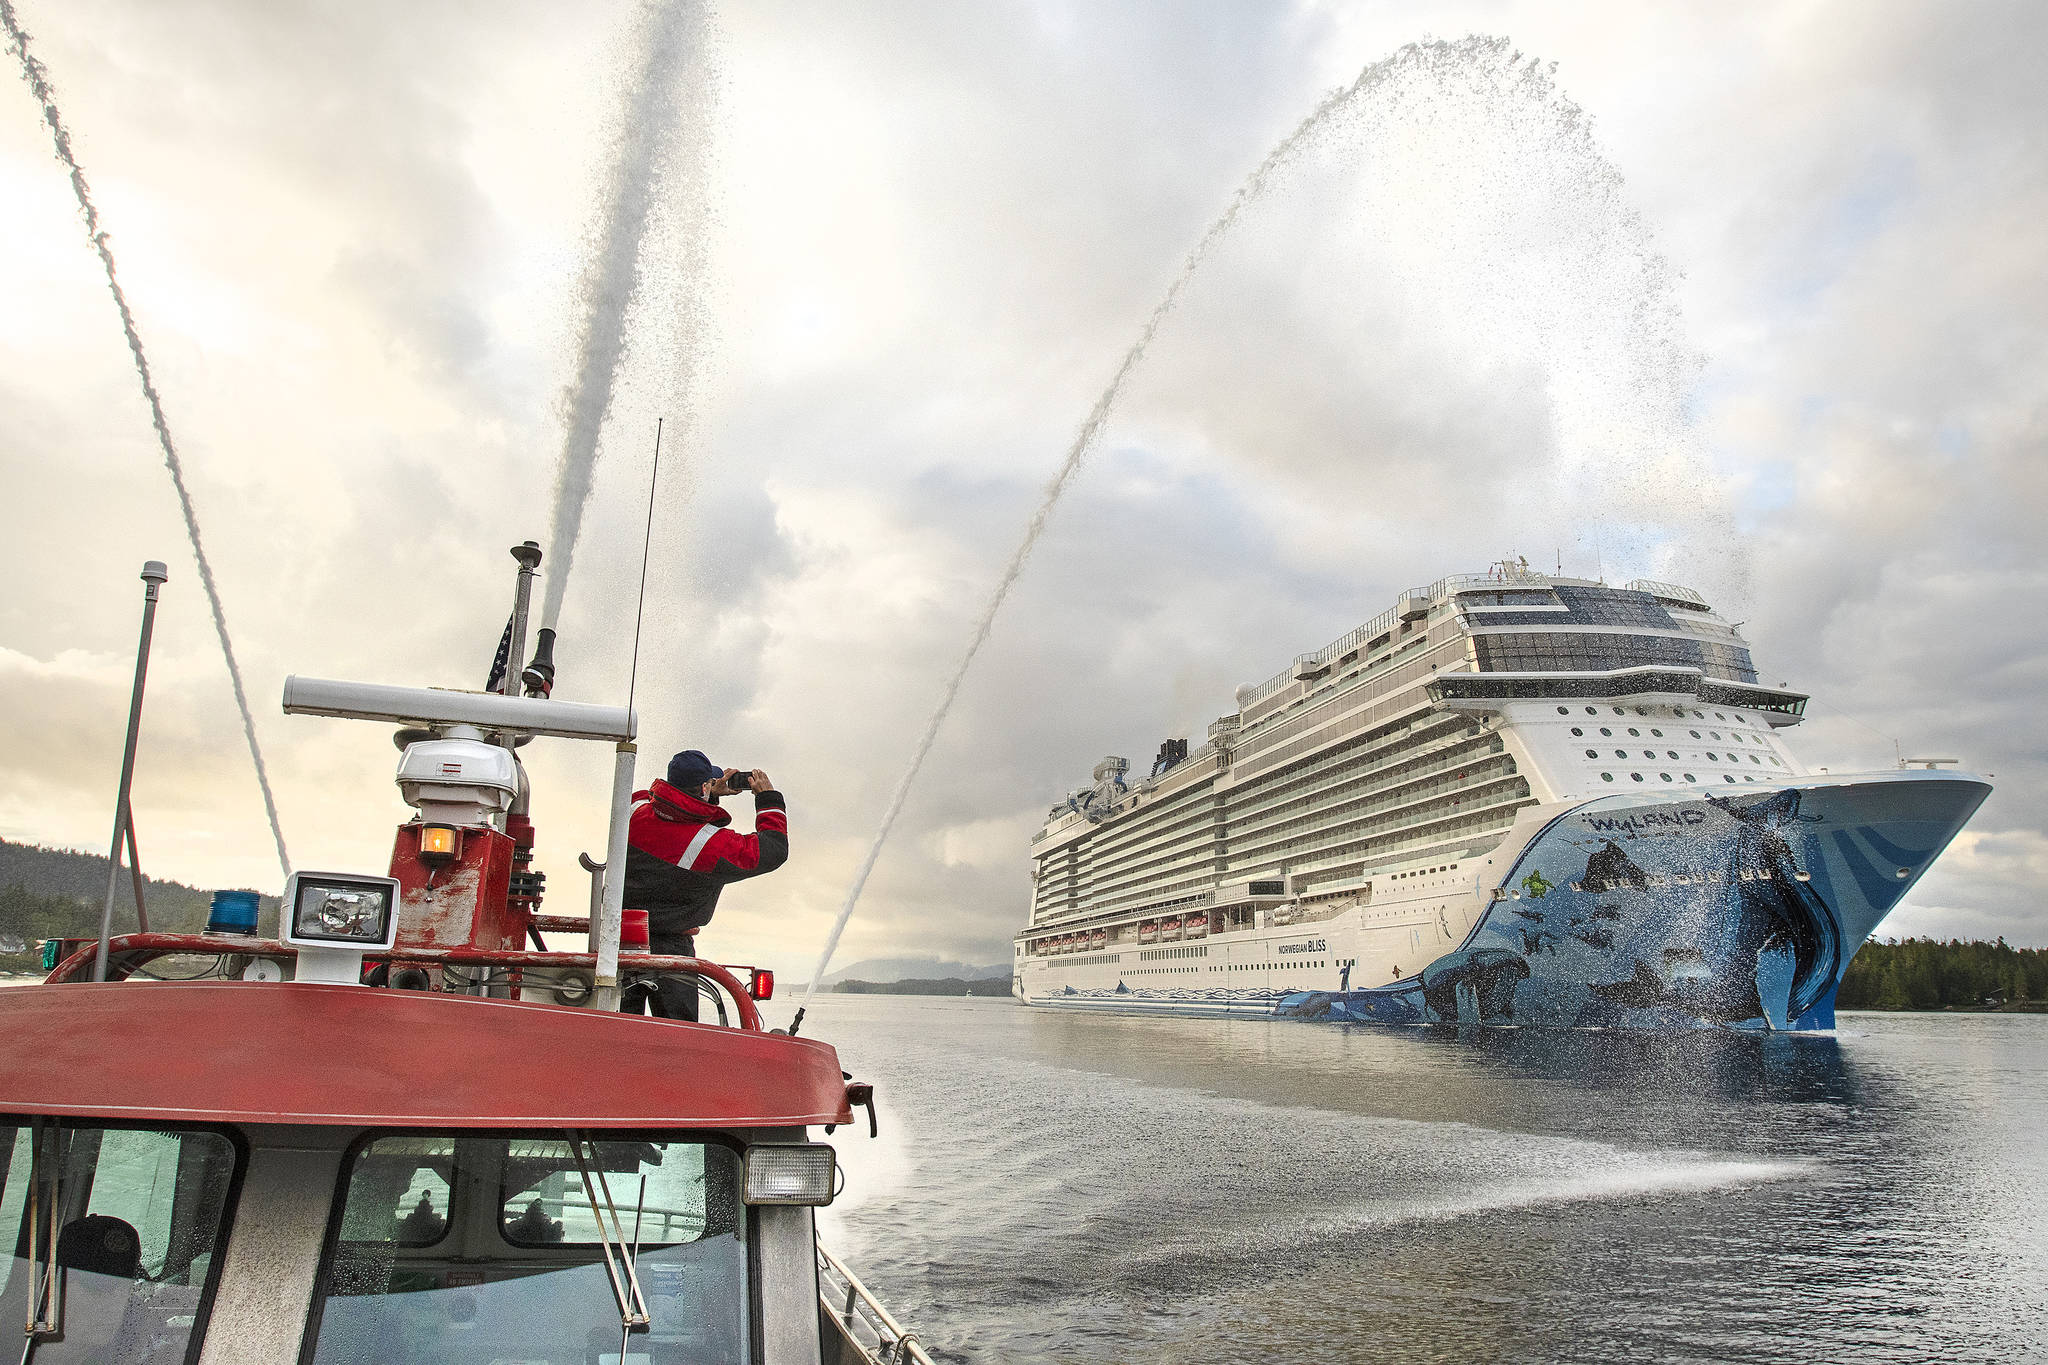 Firefighter medic Andy Tighe snaps a photo of the breakaway plus-class cruise ship Norwegian Bliss while Captain Tracy Mettler operates a fireboat in the Tongass Narrows in Ketchikan, Alaska, on June 4, 2018. President Joe Biden signed into law Monday, May 24, 2021, legislation that opens a door for resumed cruise ship travel to Alaska after the pandemic last year scrapped sailings. (Dustin Safranek/Ketchikan Daily News via AP)